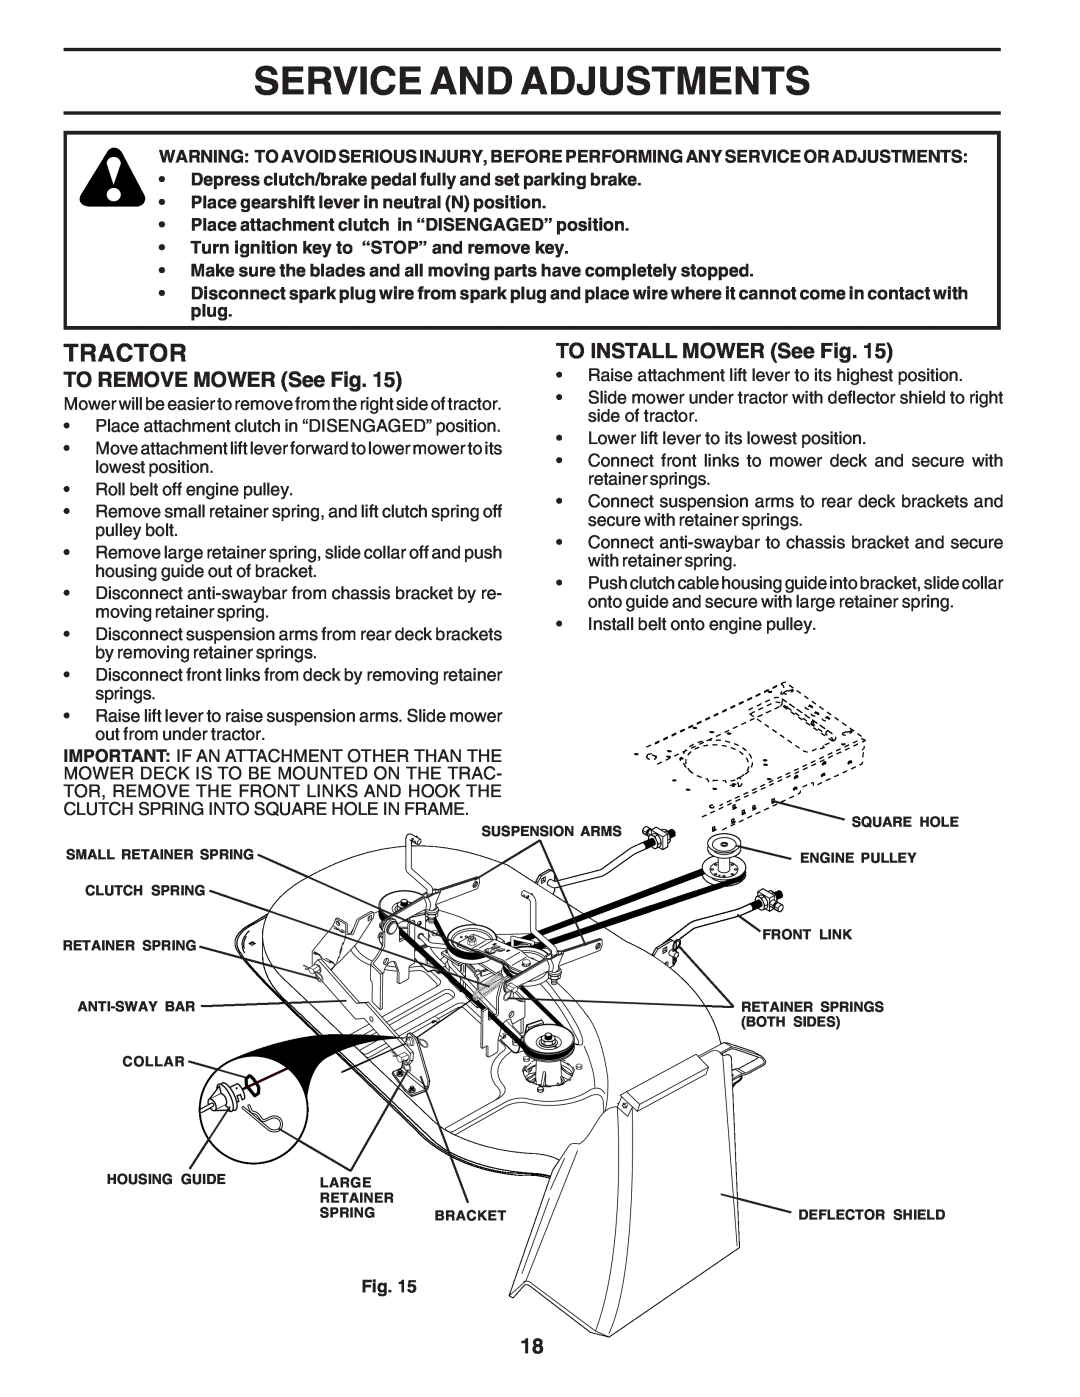 Poulan PC1538B manual Service And Adjustments, TO REMOVE MOWER See Fig, TO INSTALL MOWER See Fig, Tractor 